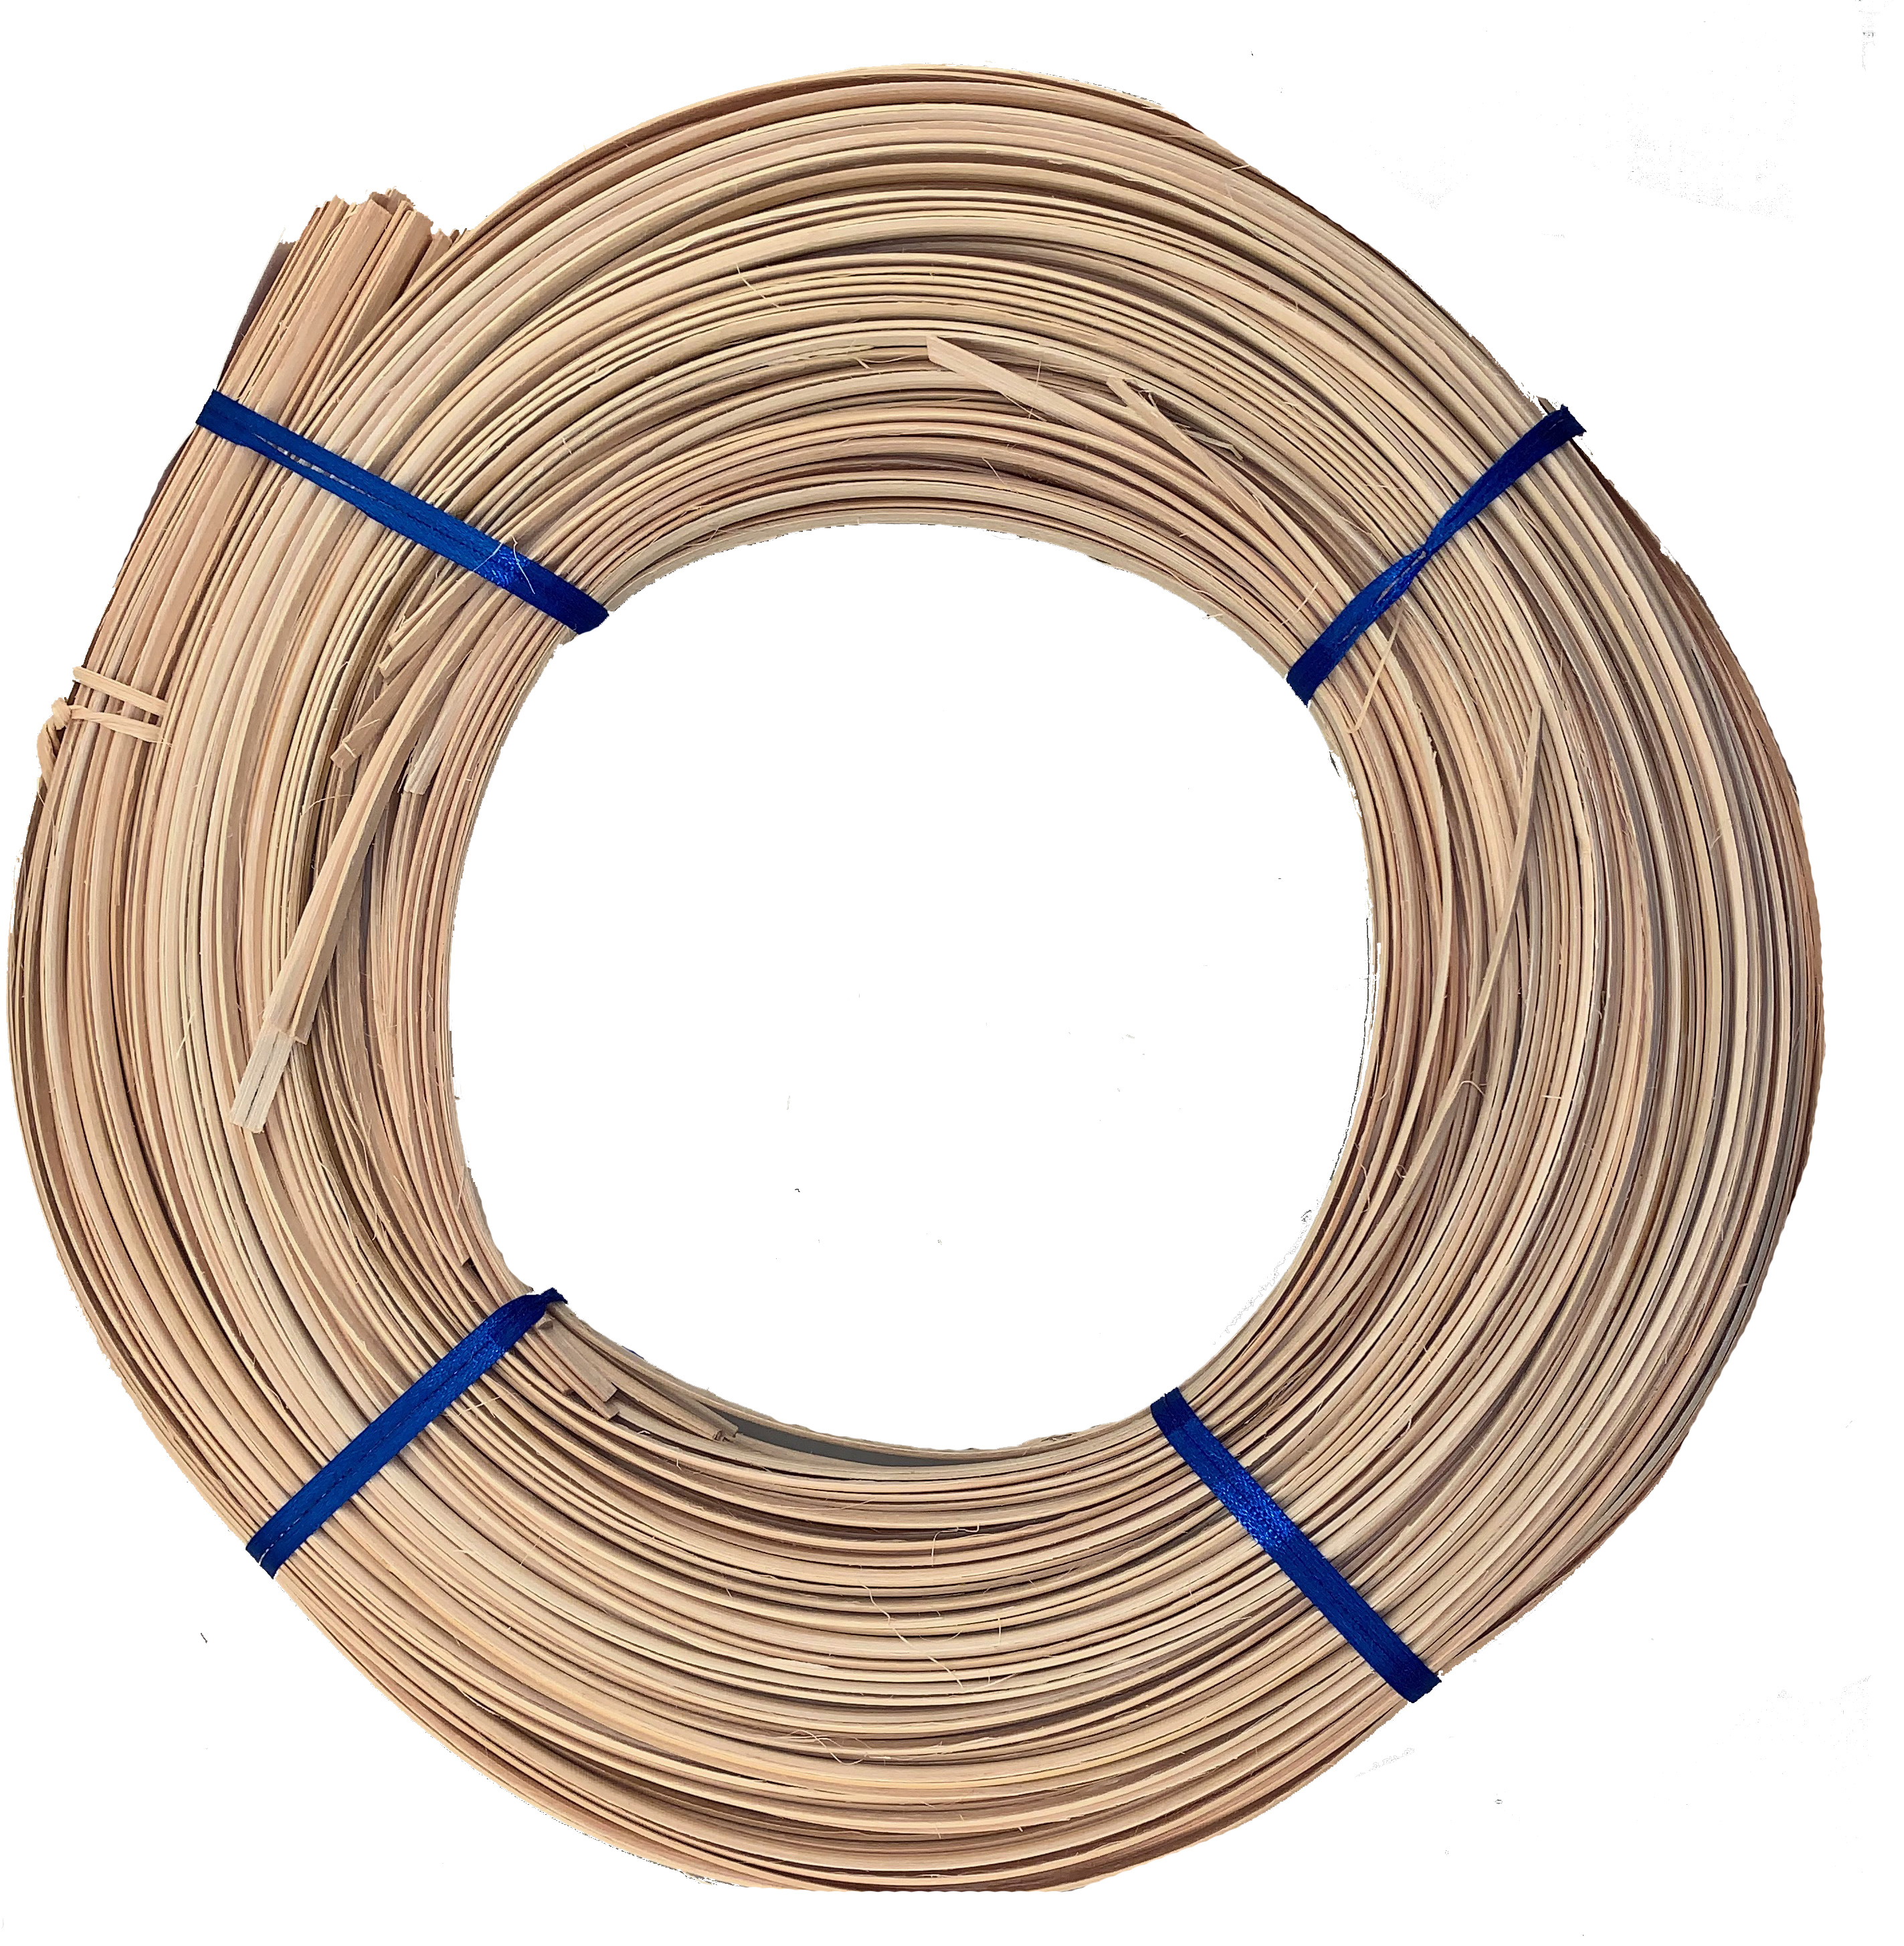 3/16 flat oval reed - 260 ft.